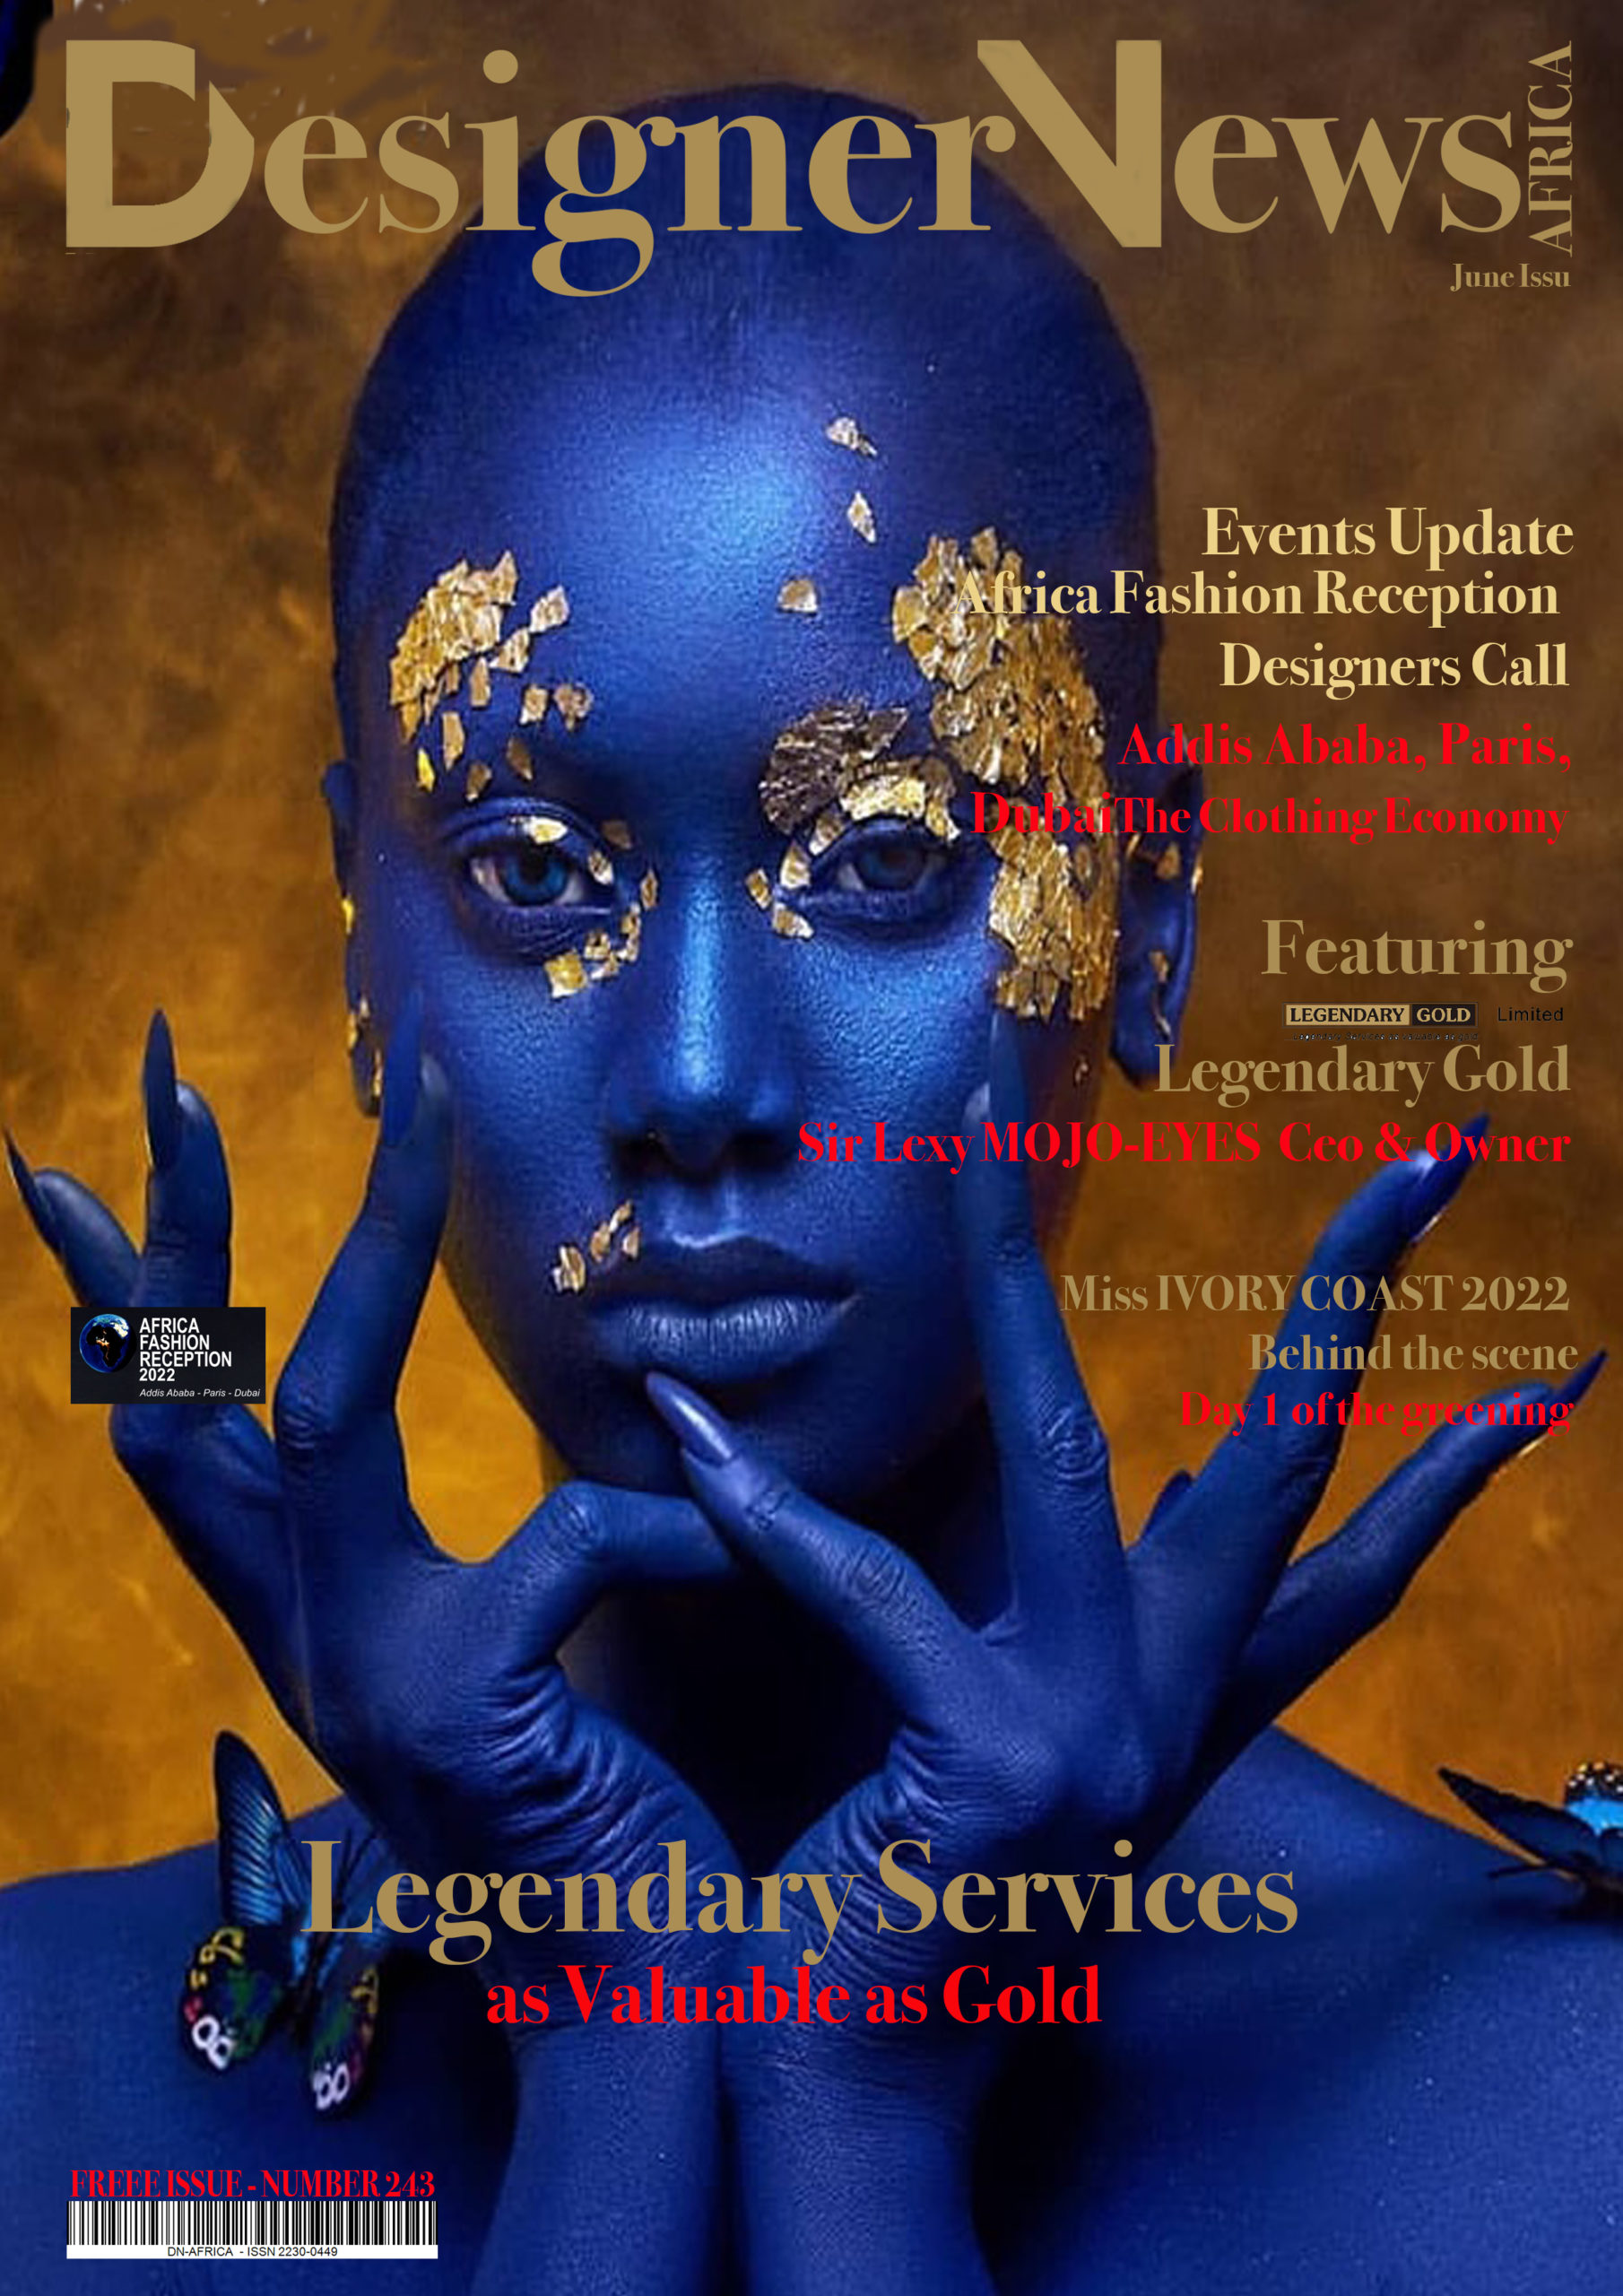 COVER-DN-AFRICA-COVER-JUN-2022-MAG-NUMBER-243--2022–-AFRICAN-FASHION-RECEPTION-BY-LEGENDARY-GOLD-LEXY-MOYO-EYES-Ceo-and-Owner-DN-AFRICA-DN-A-INERNATIONAL-Media-Partner-AS-VOGUE-COVER